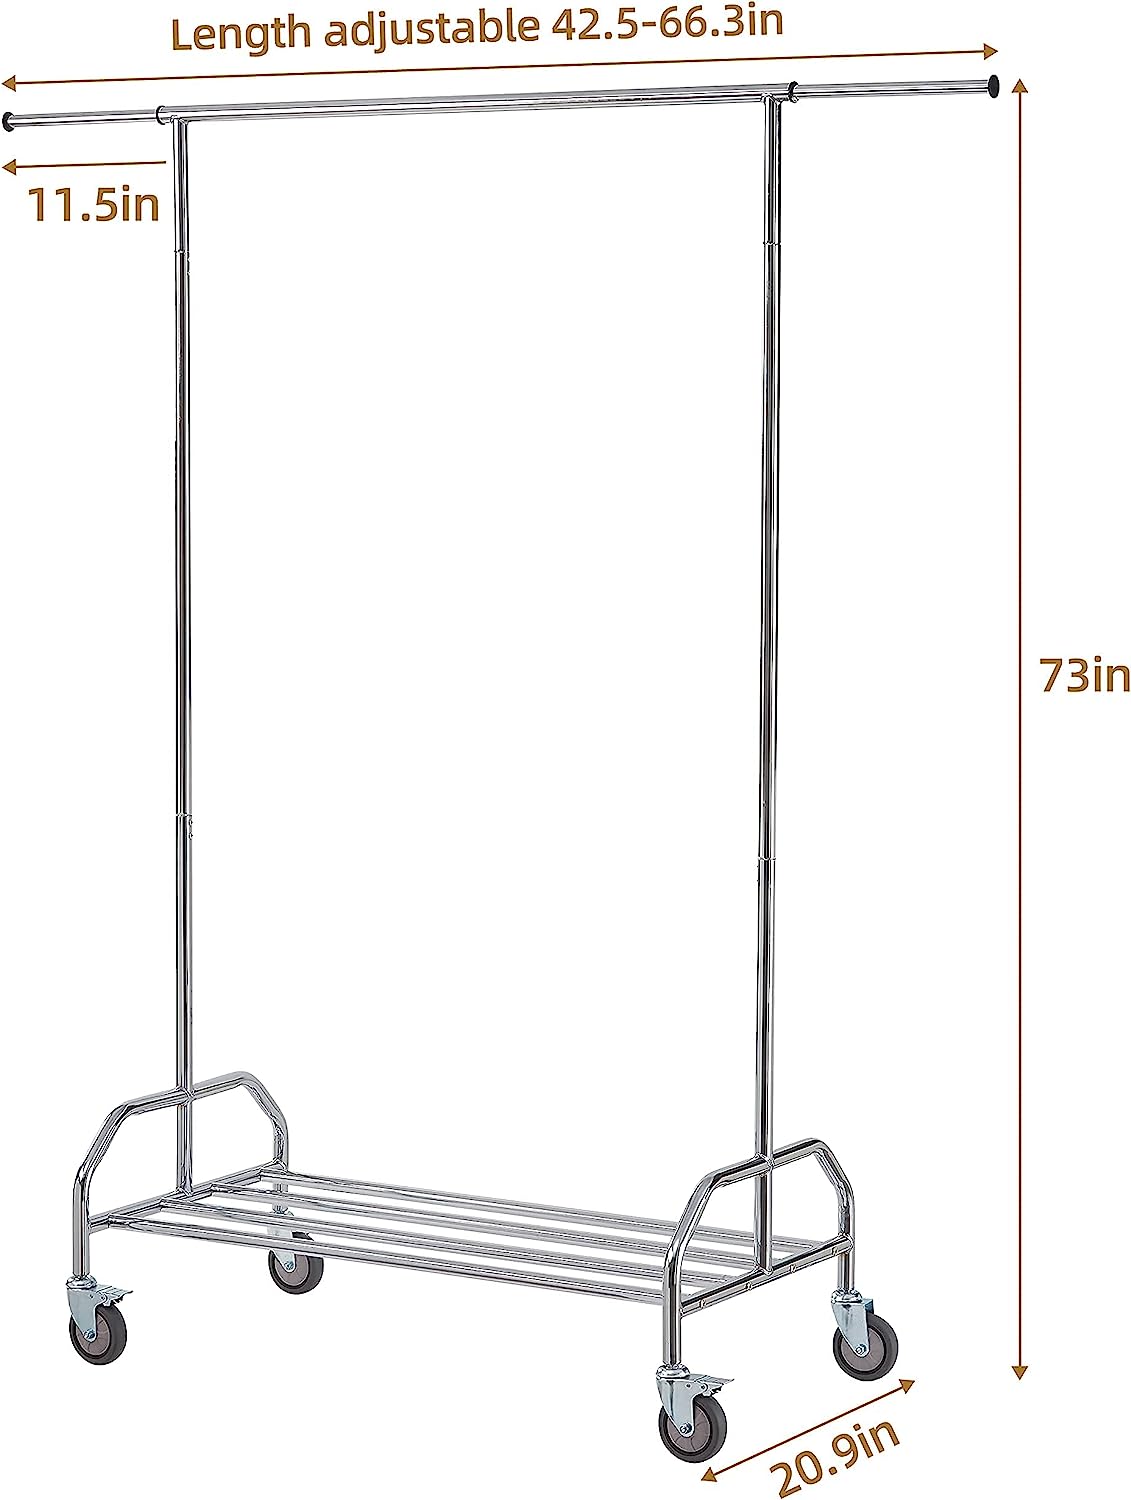 Heavy Duty Clothing Racks for Hanging Clothes, Adjustable Rolling Commercial Garment Rail on Wheels, Free Standing Standard Rod & Shelf for Wardrobe Organization, Chrome Plated